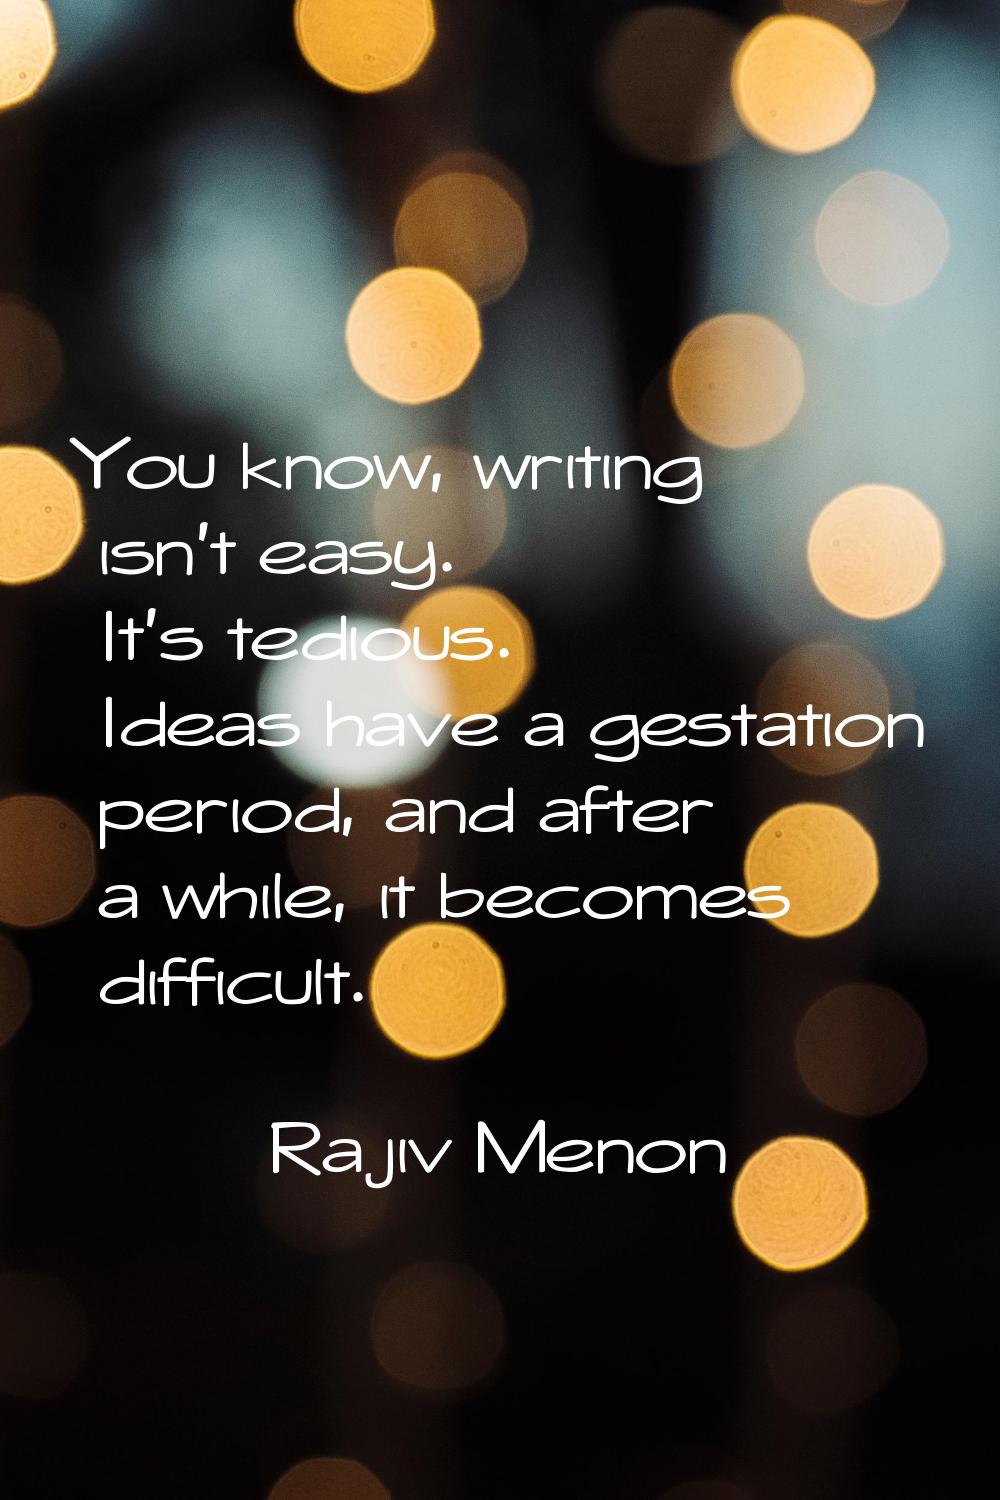 You know, writing isn't easy. It's tedious. Ideas have a gestation period, and after a while, it be